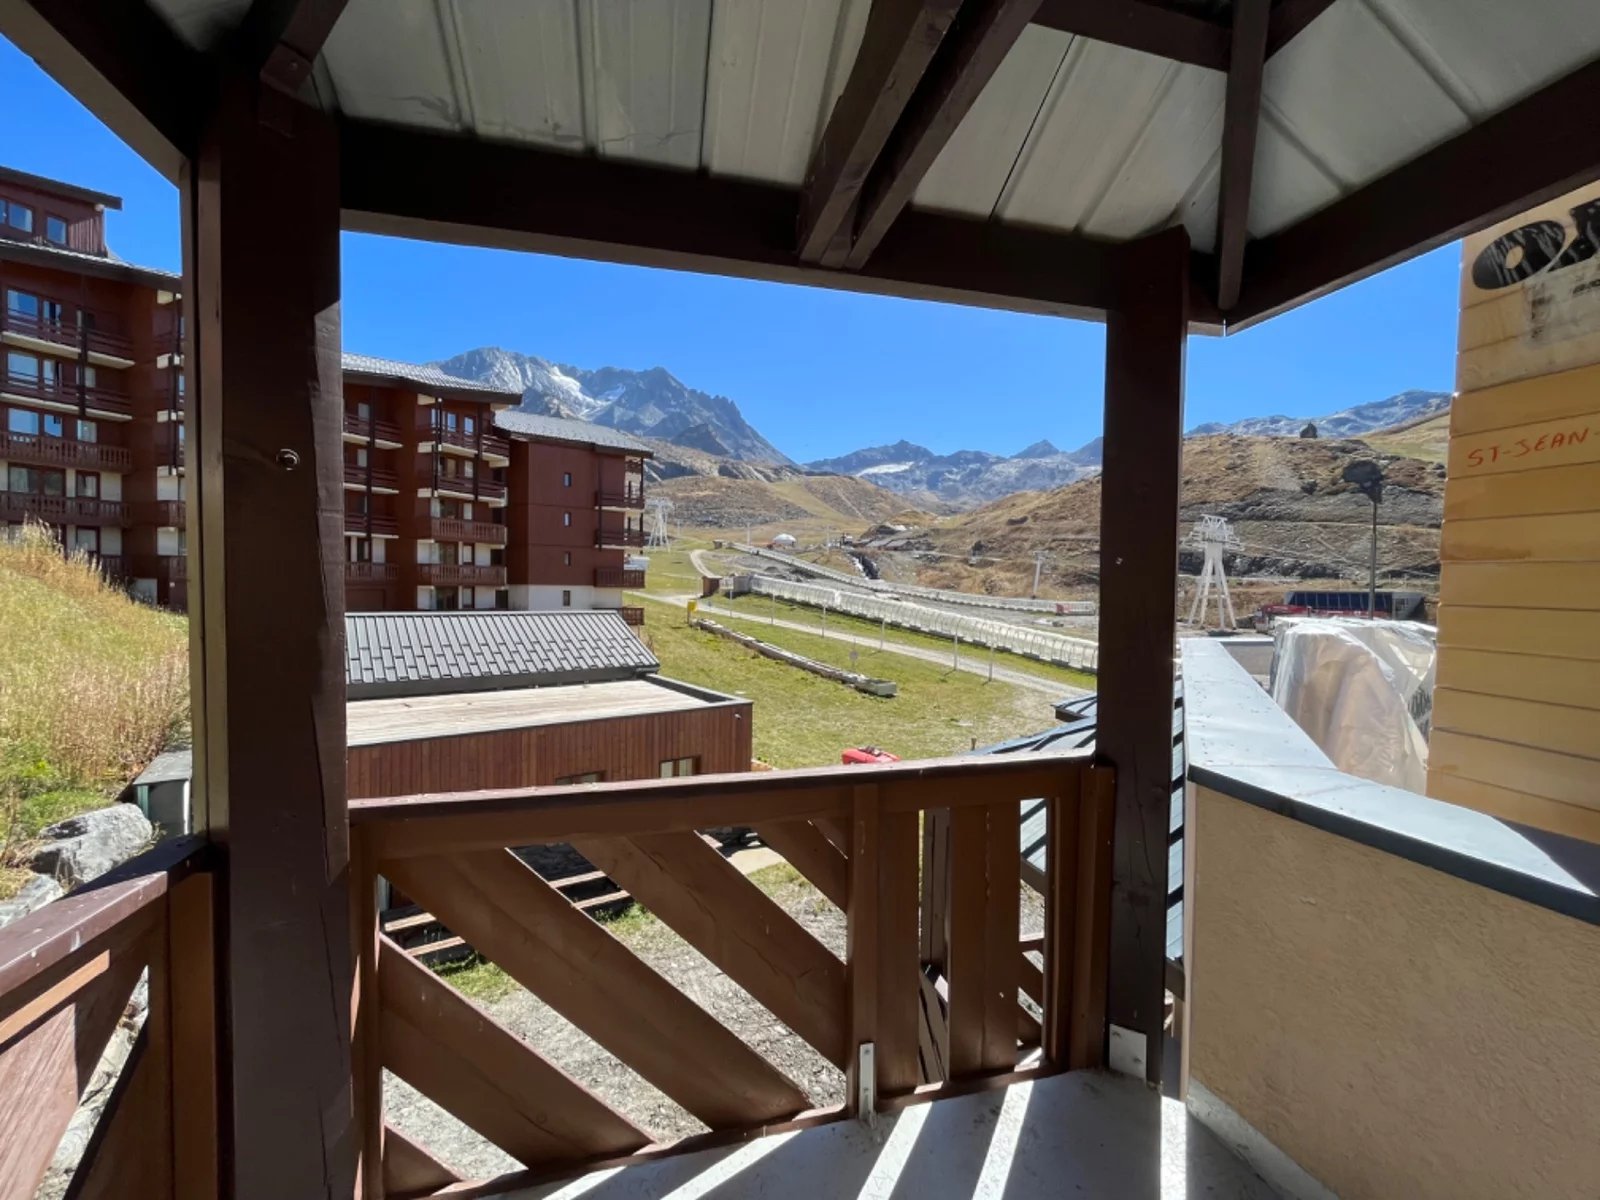 TWO ADJOINING APARTMENTS TO BE REUNITED AT THE FOOT OF THE SLOPES